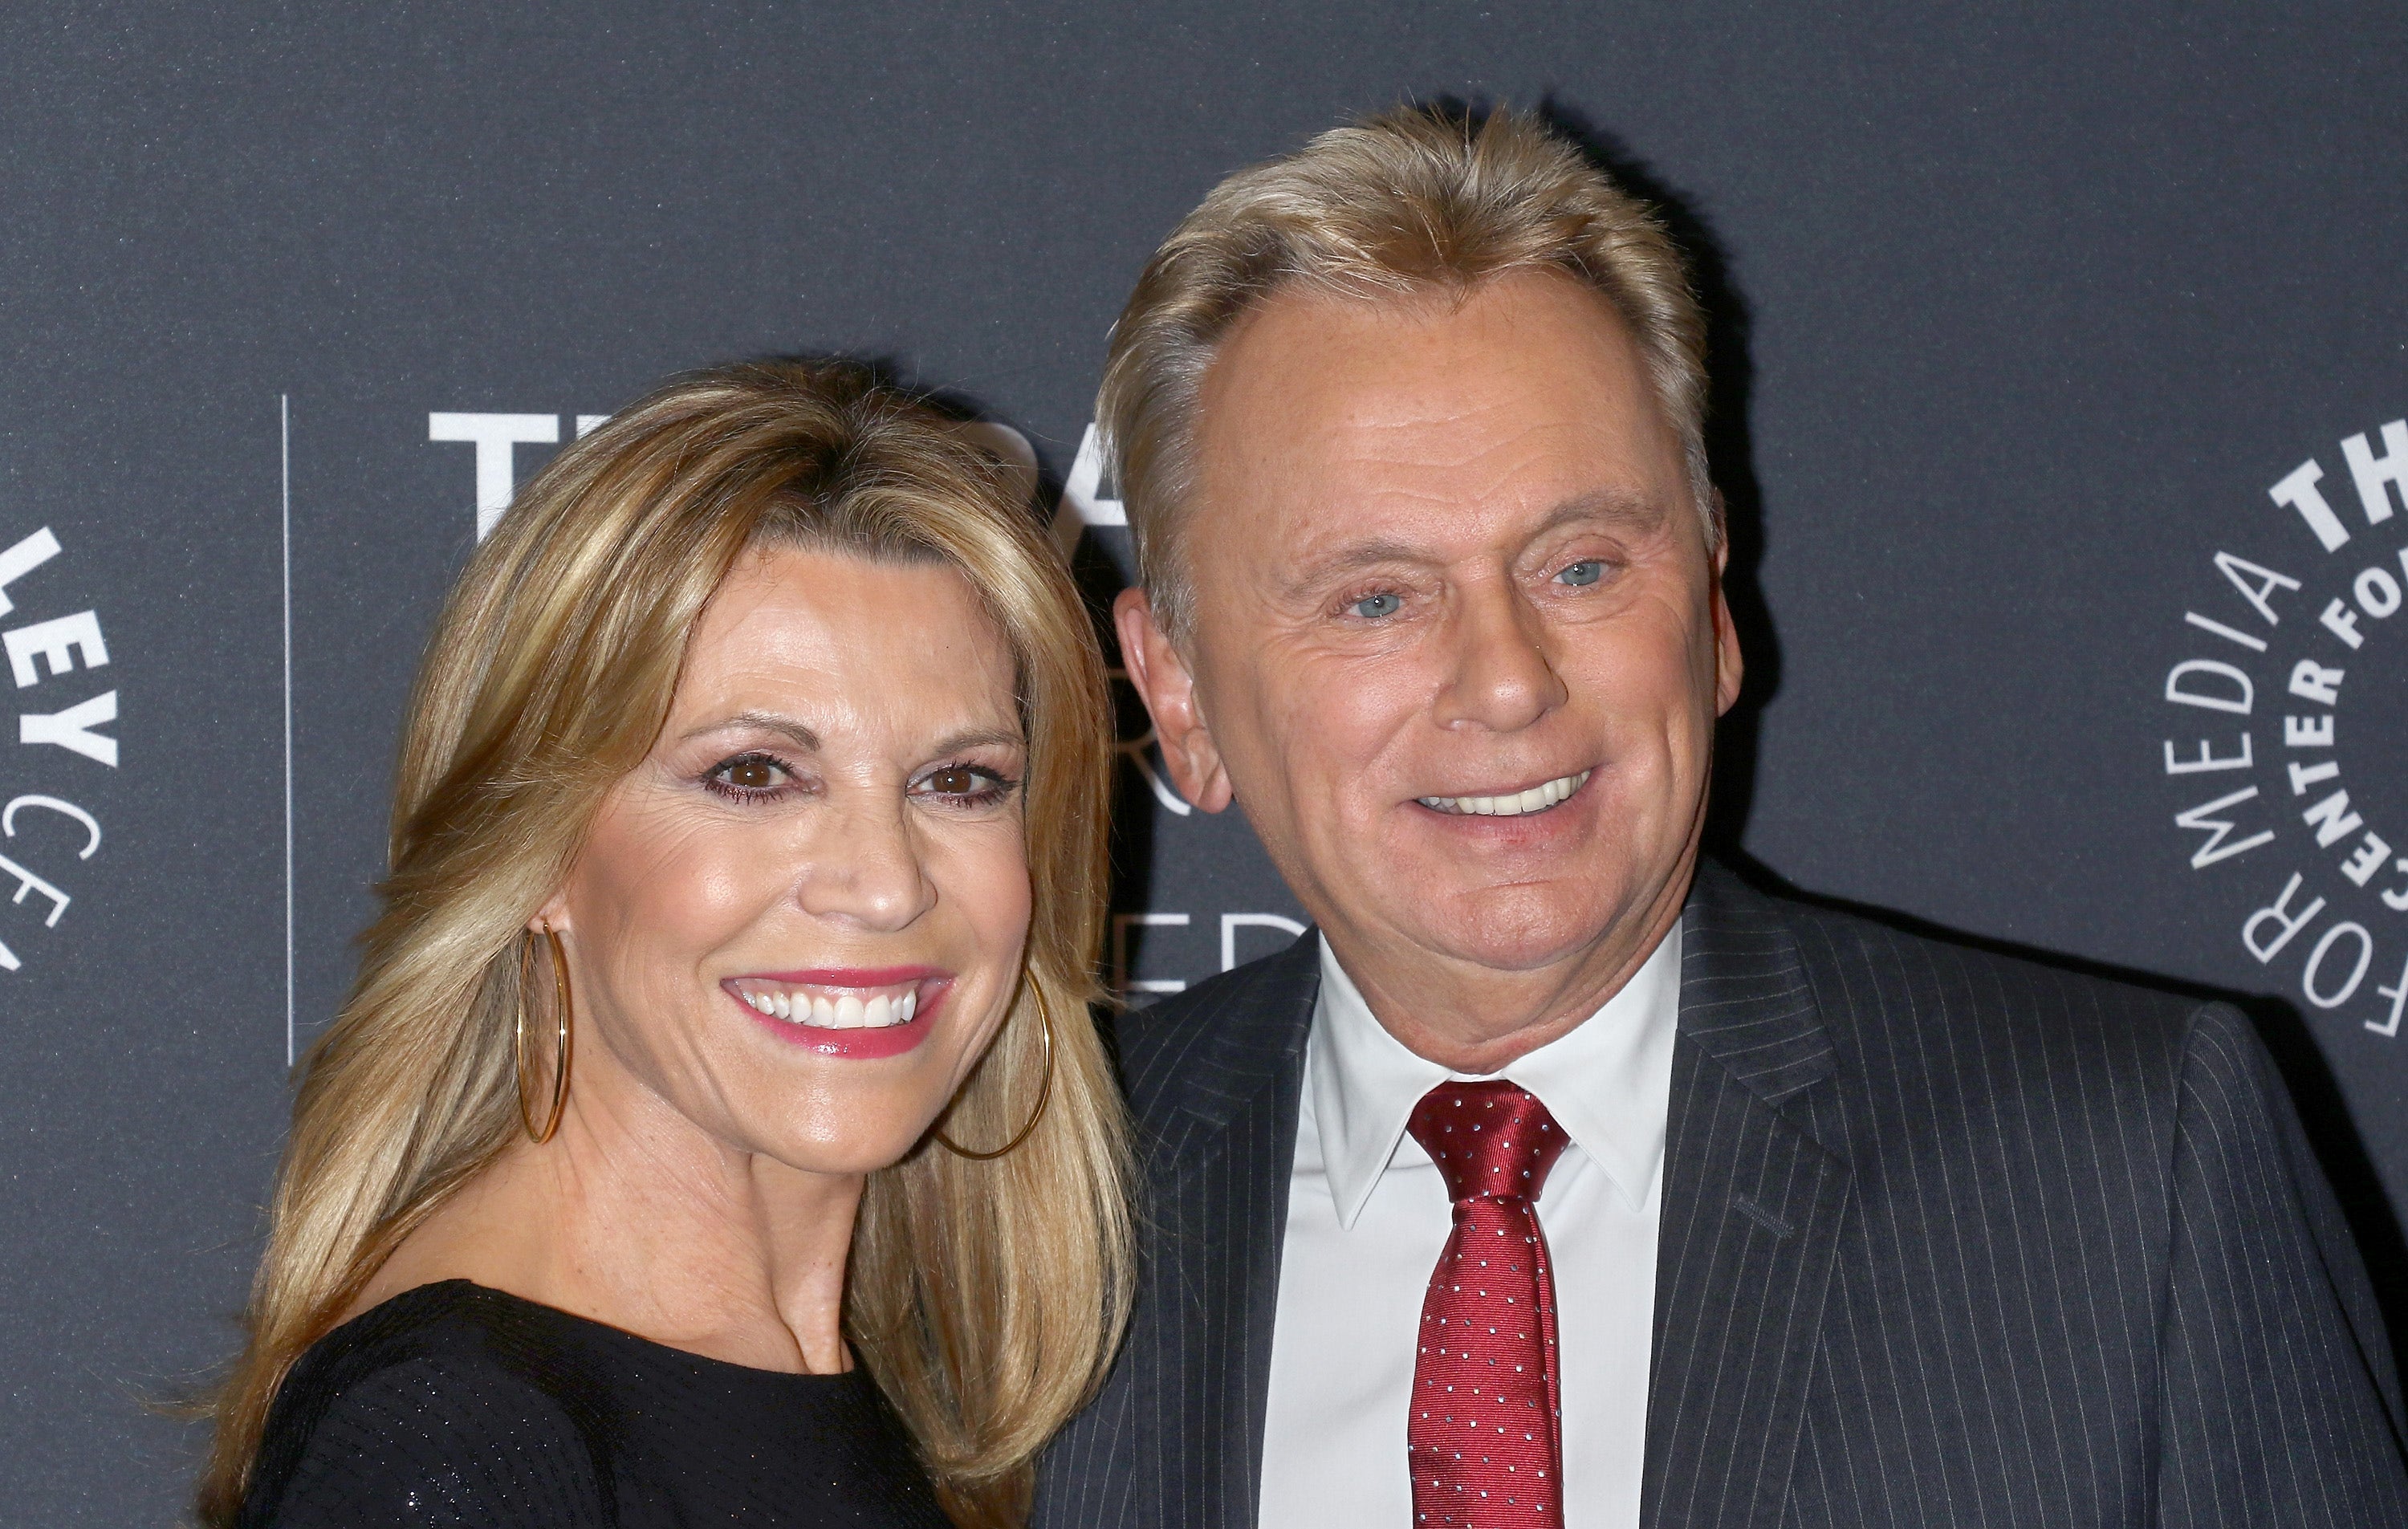 Vanna White details 'brother and sister' bond with 'Wheel of Fortune' co-host Pat Sajak: 'It's perfect'